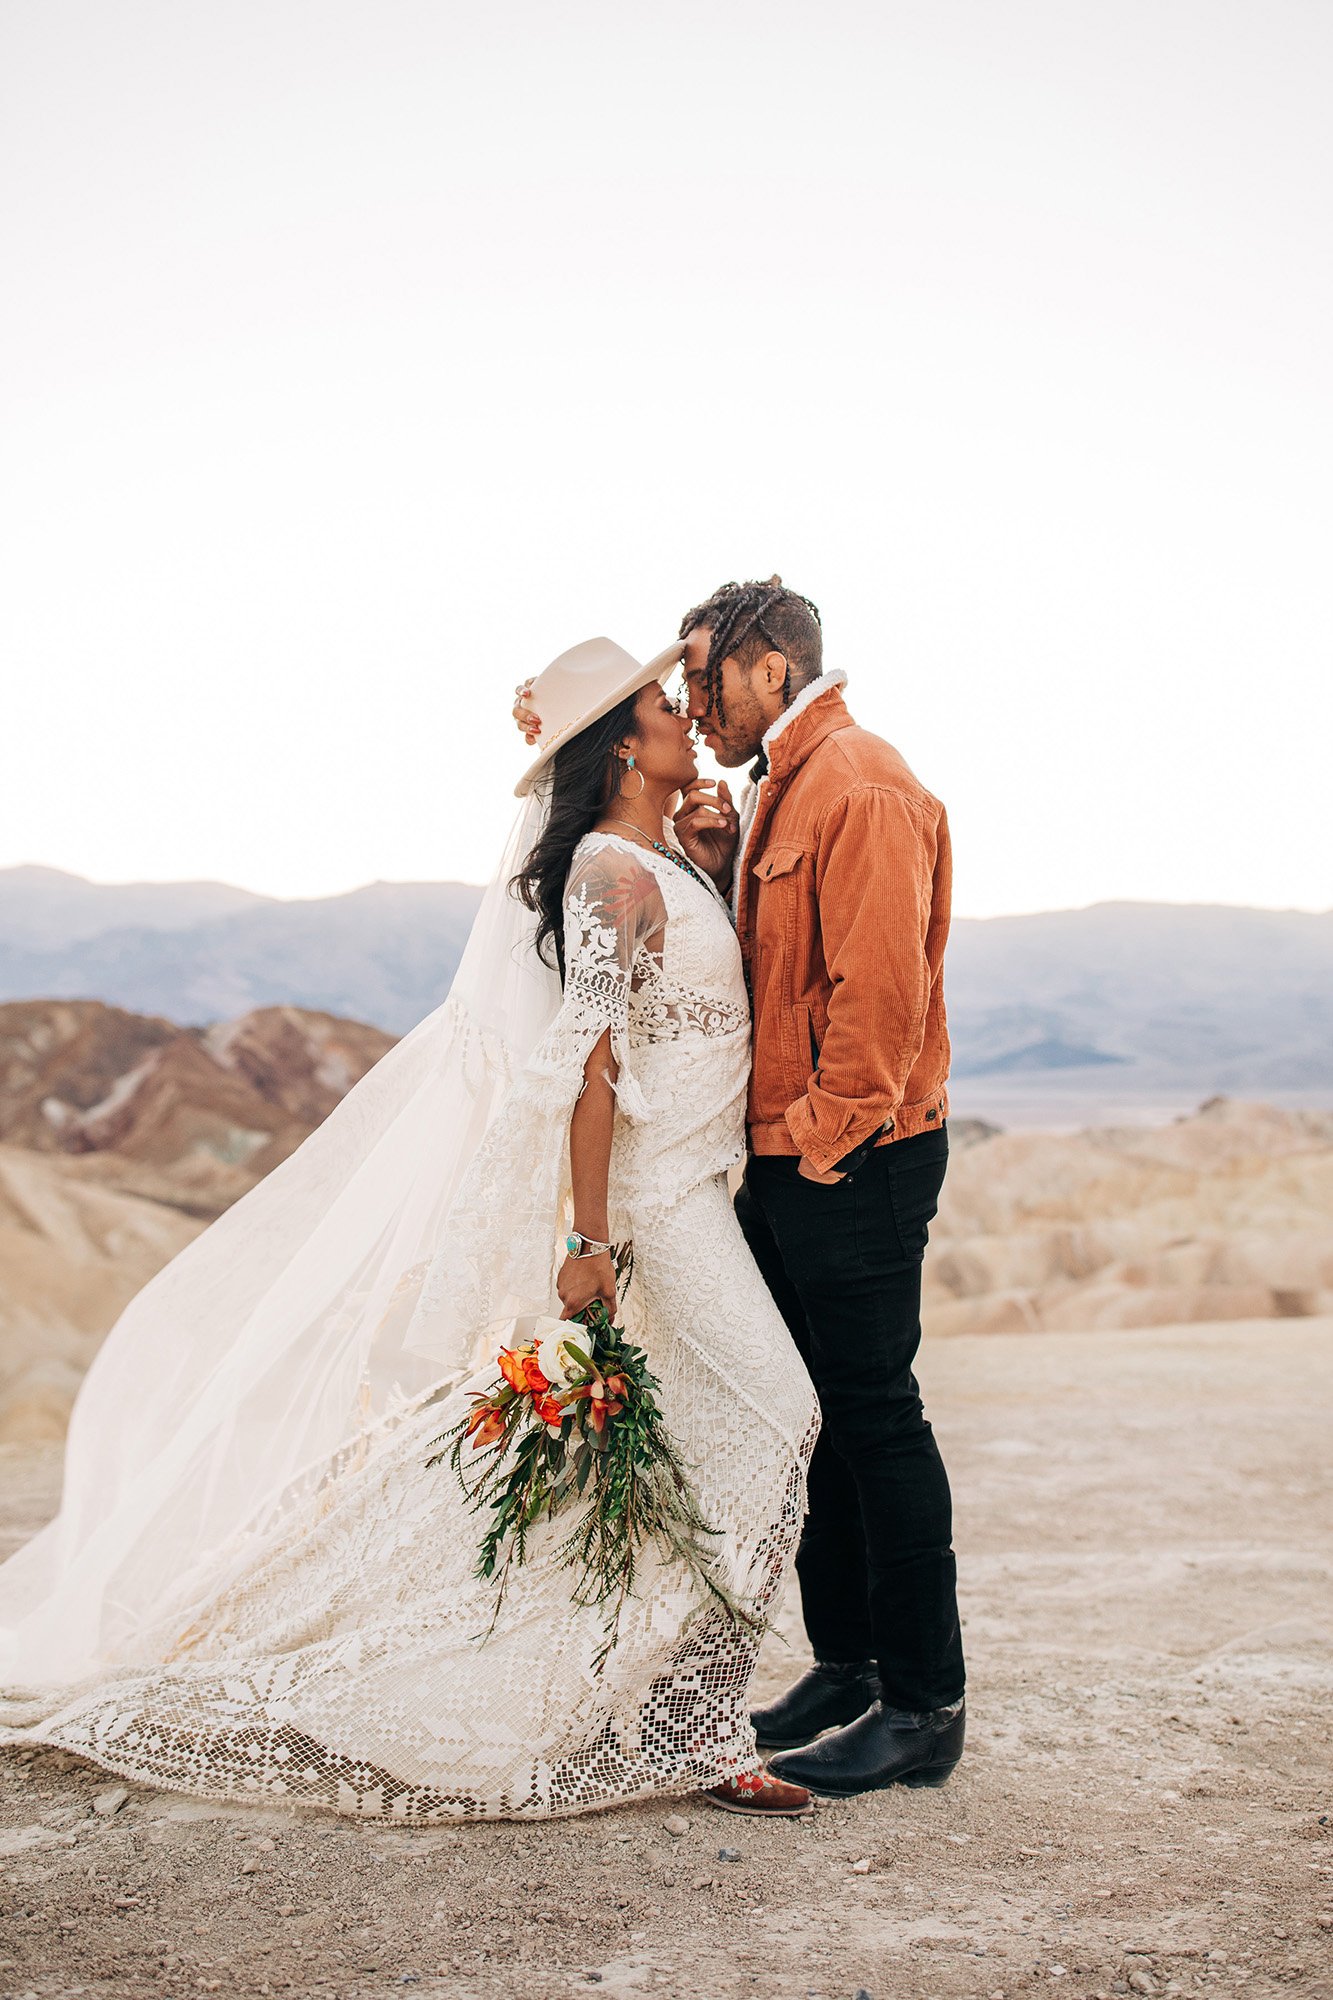 Mieko and Kevin, dressed in their wedding attire, kiss in Death Valley after their wedding.